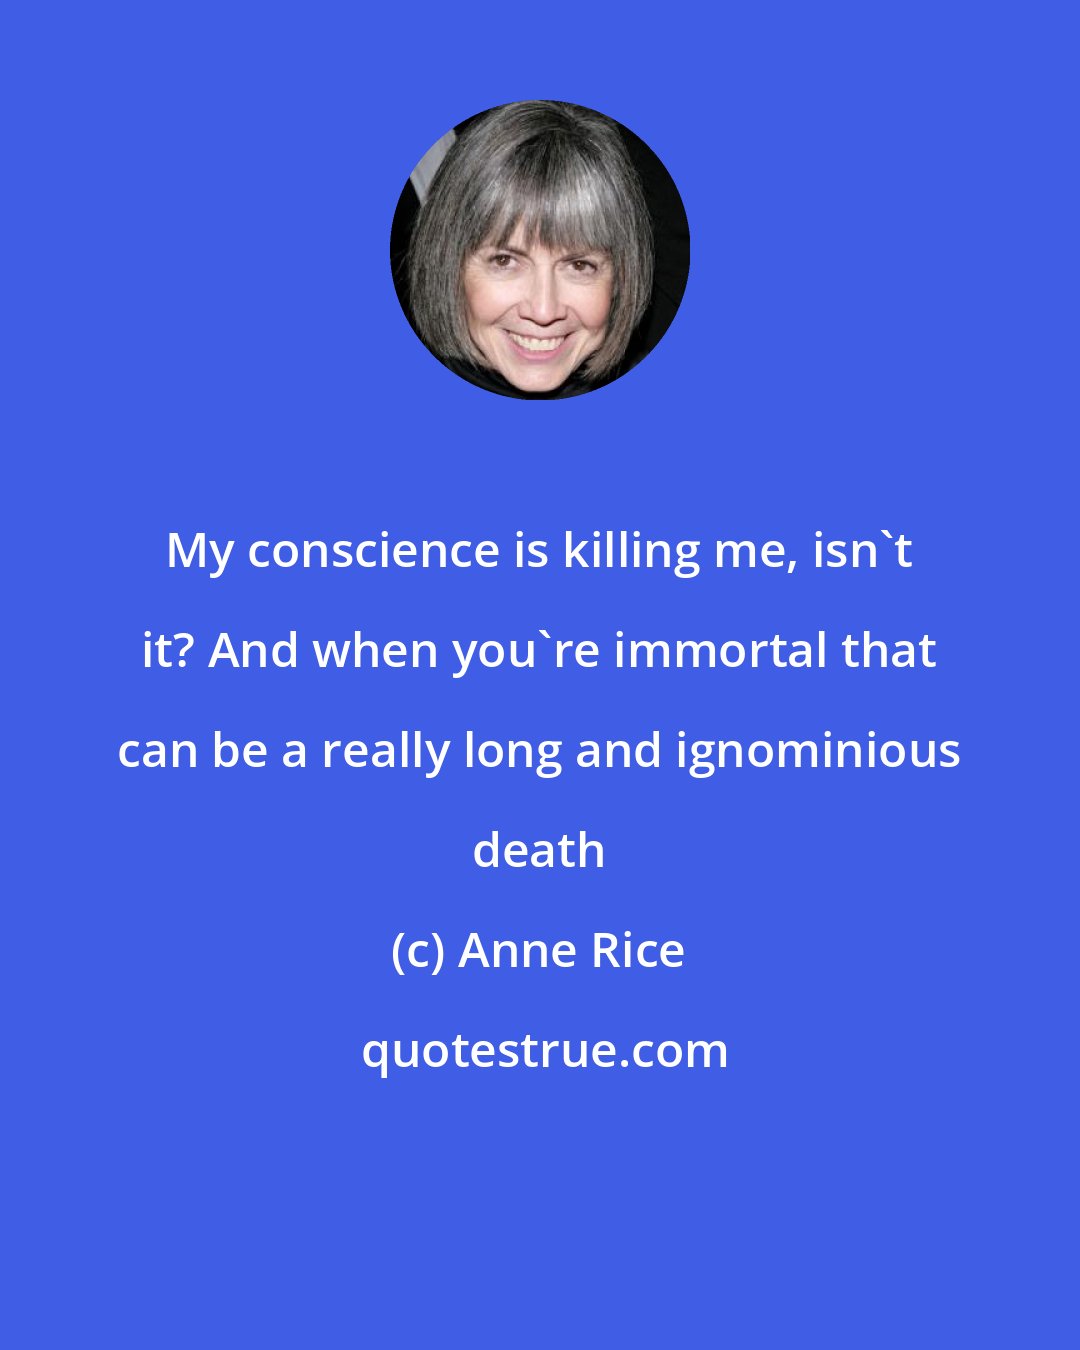 Anne Rice: My conscience is killing me, isn't it? And when you're immortal that can be a really long and ignominious death